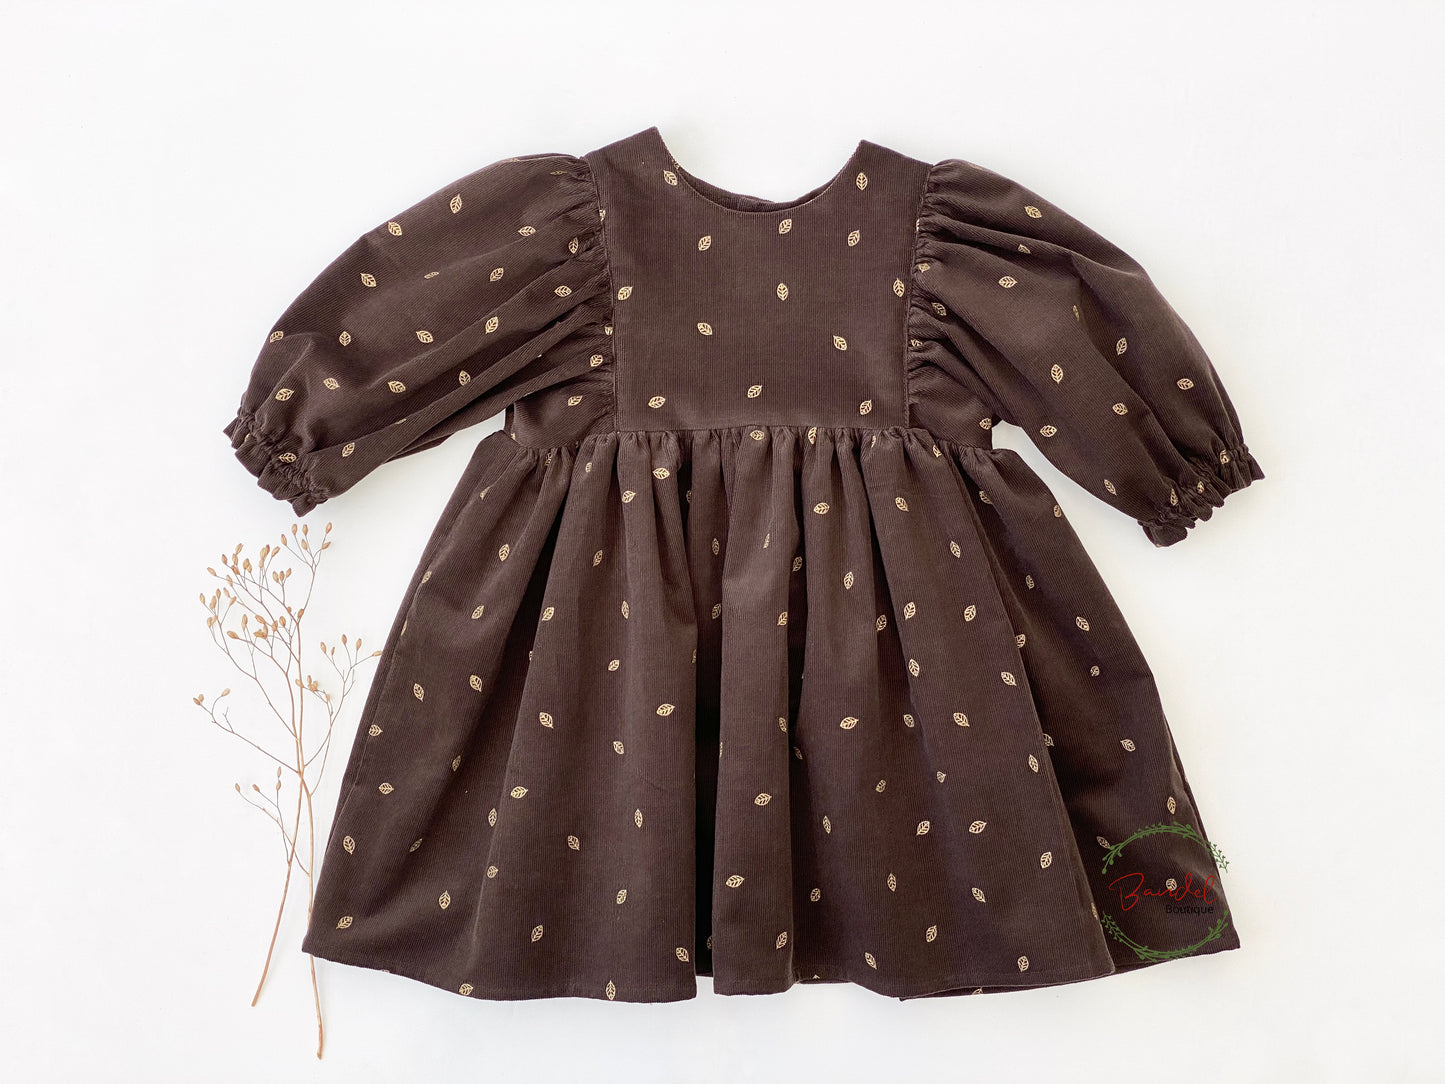 3/4 Sleeves Corduroy Girl Dress Crafted with a luxurious corduroy fabric featuring gold leafs prints and classic styling, this whimsical dress is finished with a ruffled hem, 3/4 length sleeves, and a wooden button closure at the back bodice.